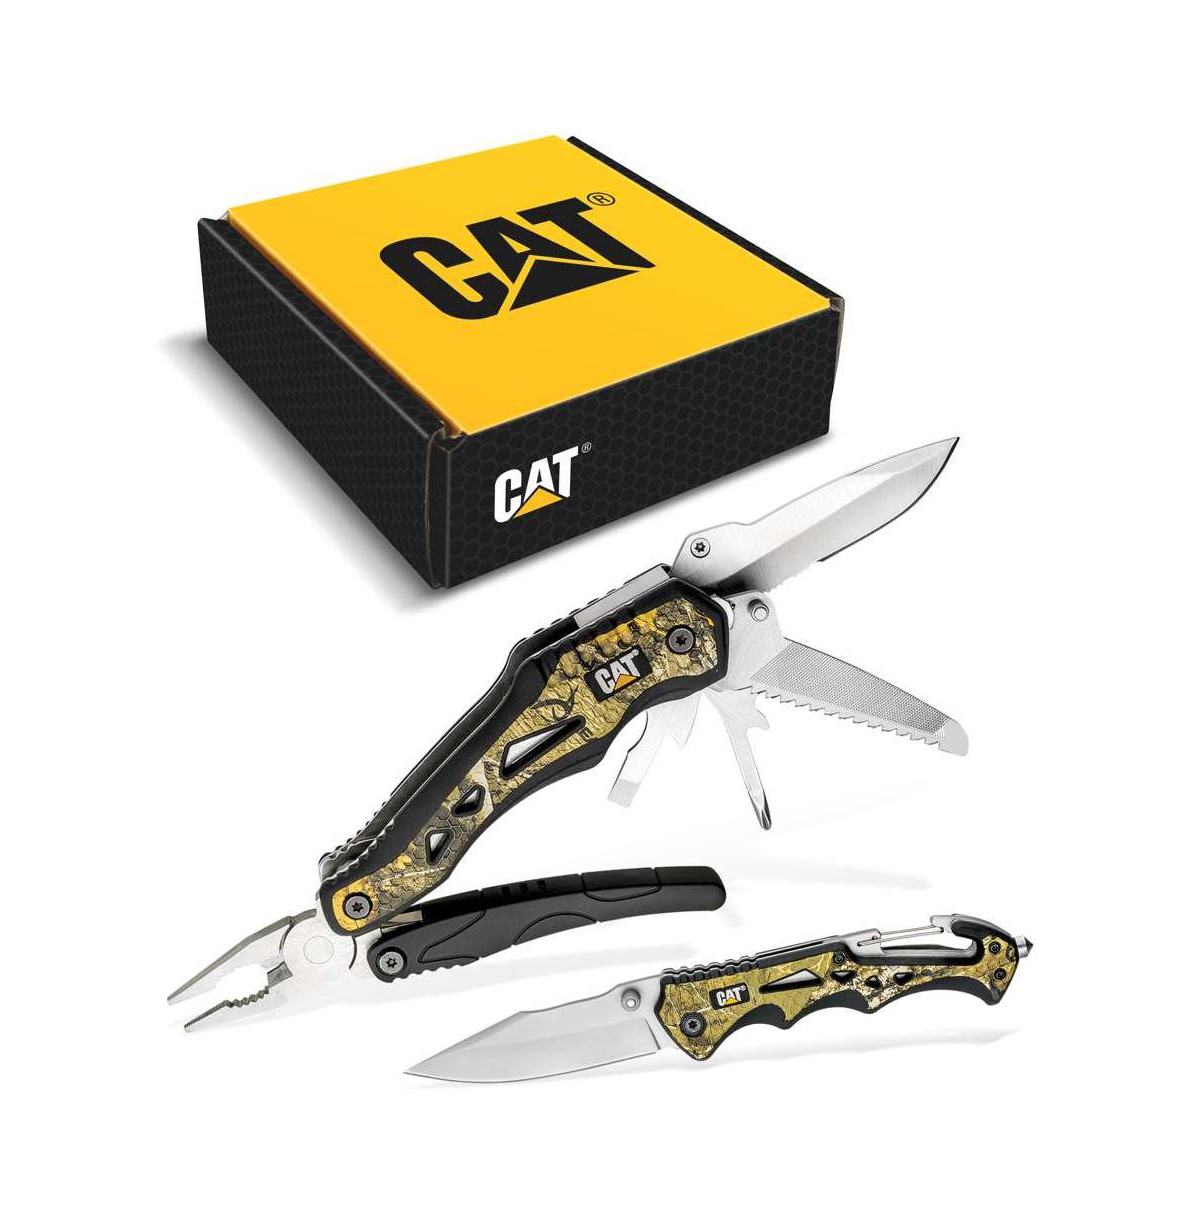 15667011 2 Piece Multi-Tool and Knife Gift Box Set with Rea sku 15667011